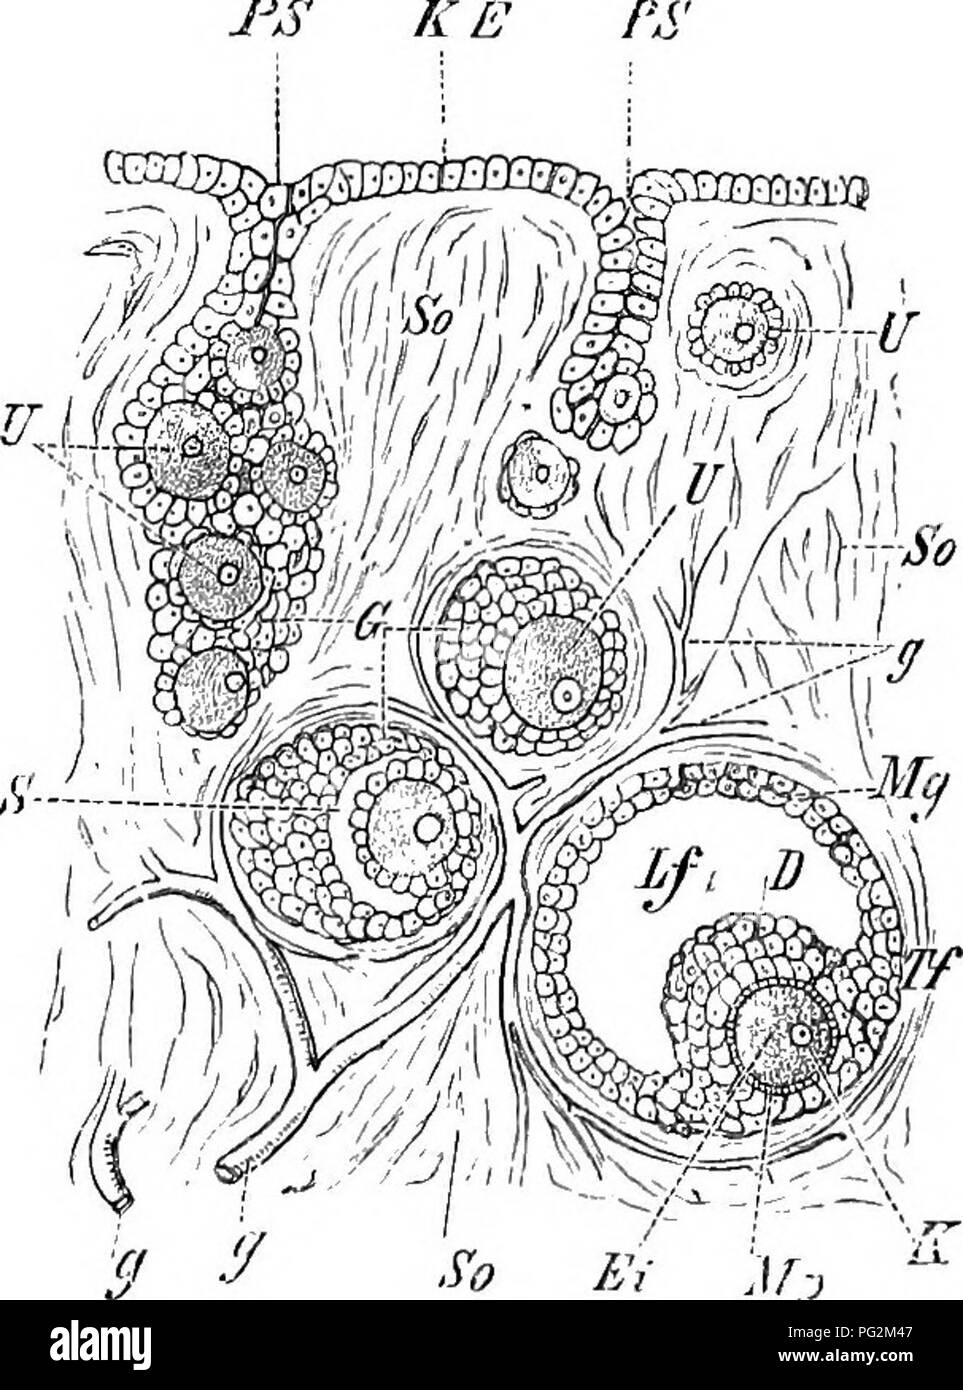 . Elements of the comparative anatomy of vertebrates. Anatomy, Comparative. 348 COMPARATIVE ANATOMY The mode of development of the ova and spermatozoa is briefly as follows ;— Ora.—The cells of the germinal epithelium grow inwards amongst the stroma of the ovary in the form of clustered masses : some of these increase in size more than the others, and give rise to the ova, while the smaller cells form an investment of follicle round them, and serve as nutritive material. The investing cells multiply, and in Mammals a cavity containing a fluid is formed in the middle of each foUicle (Fig. 276)  Stock Photo